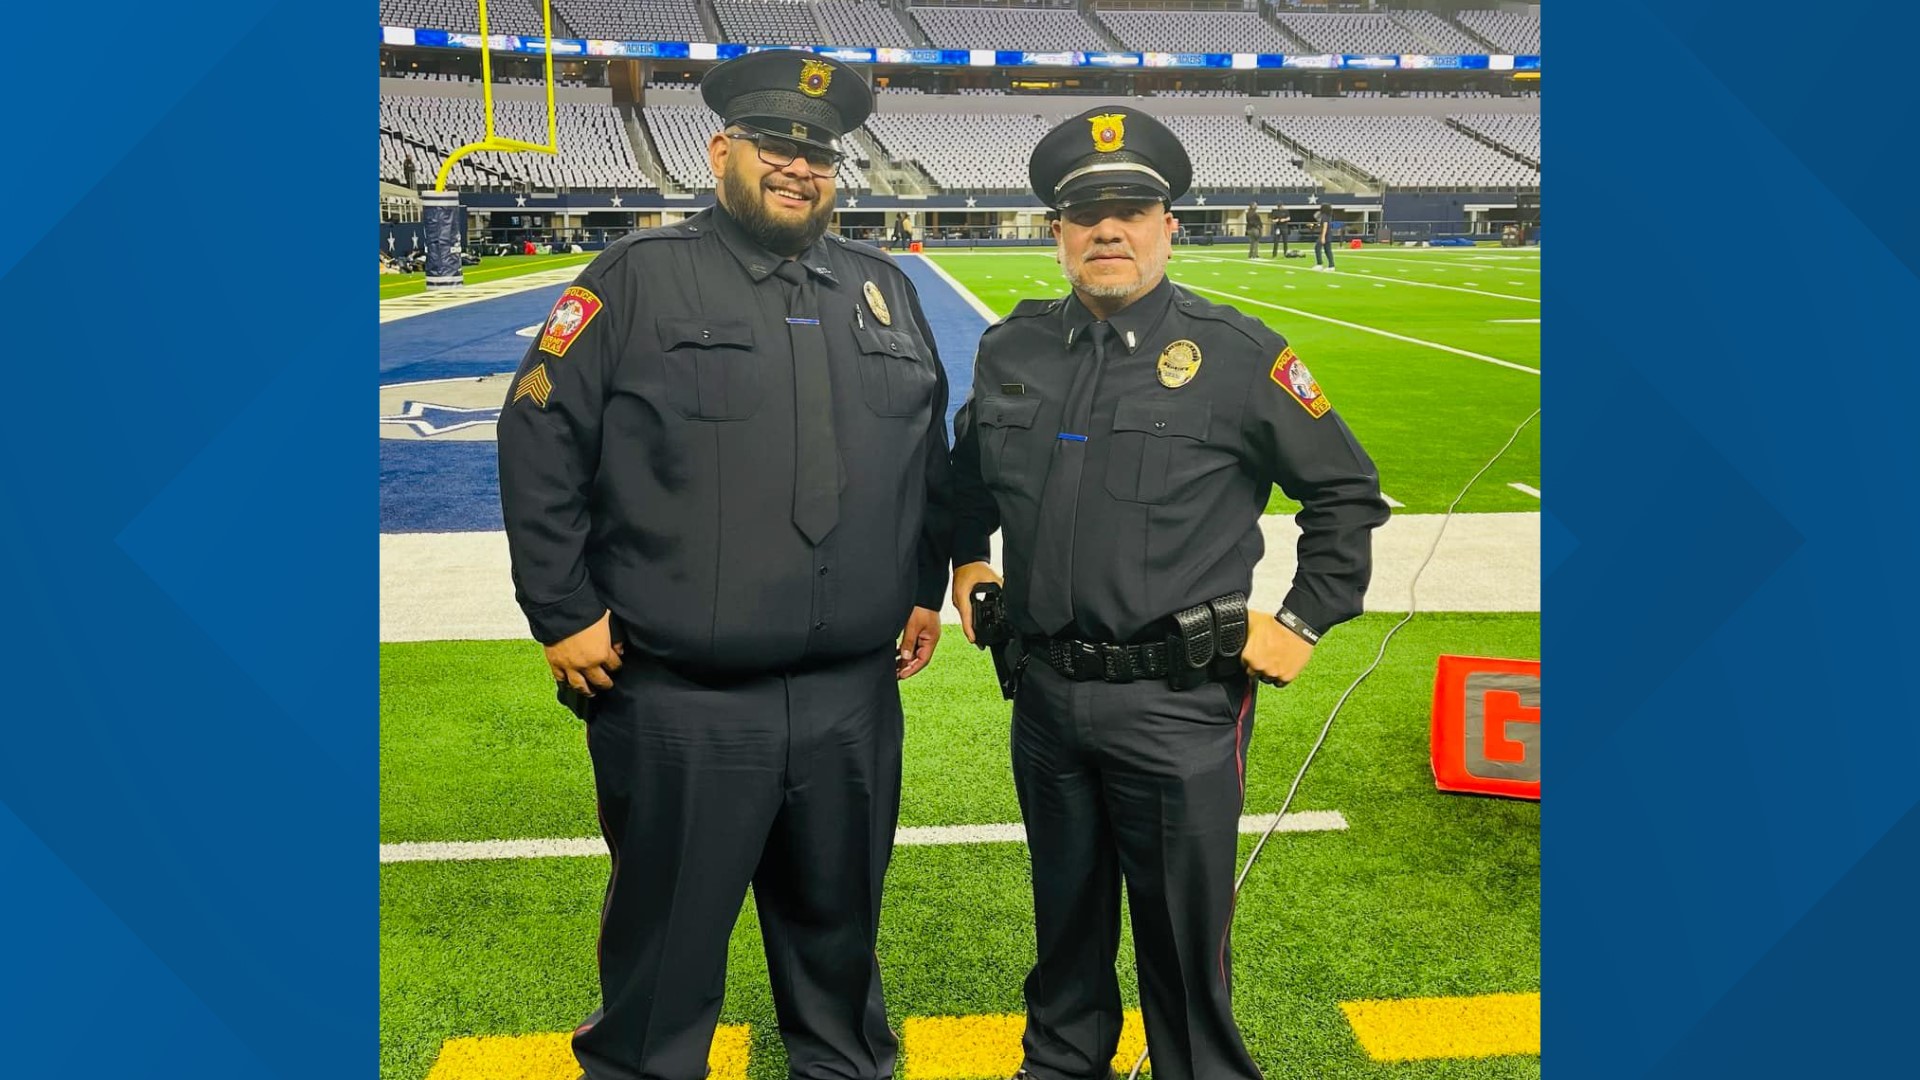 Two officers from KPD were asked to represent their community during the National Anthem as part of Law Enforcement Appreciation Week.